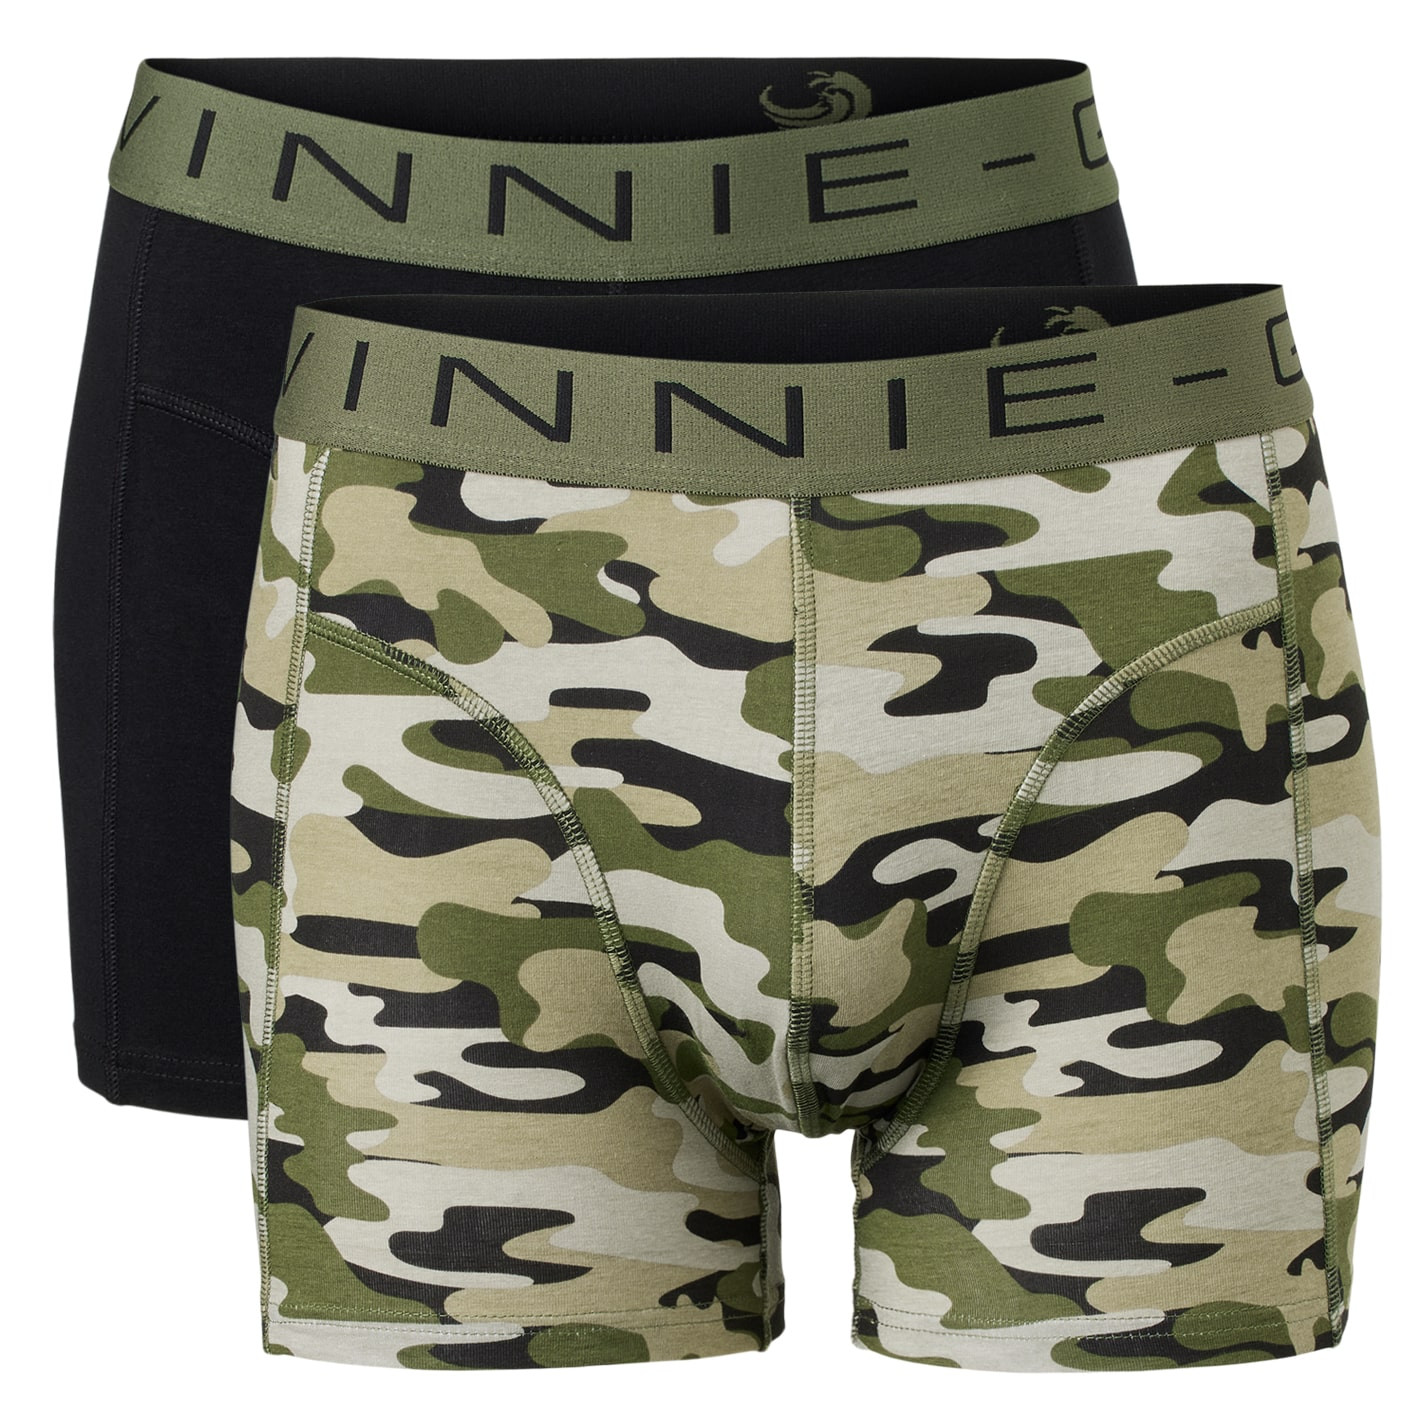 Vinnie-G Boxershorts 2-pack Black / Army Green Combo-M